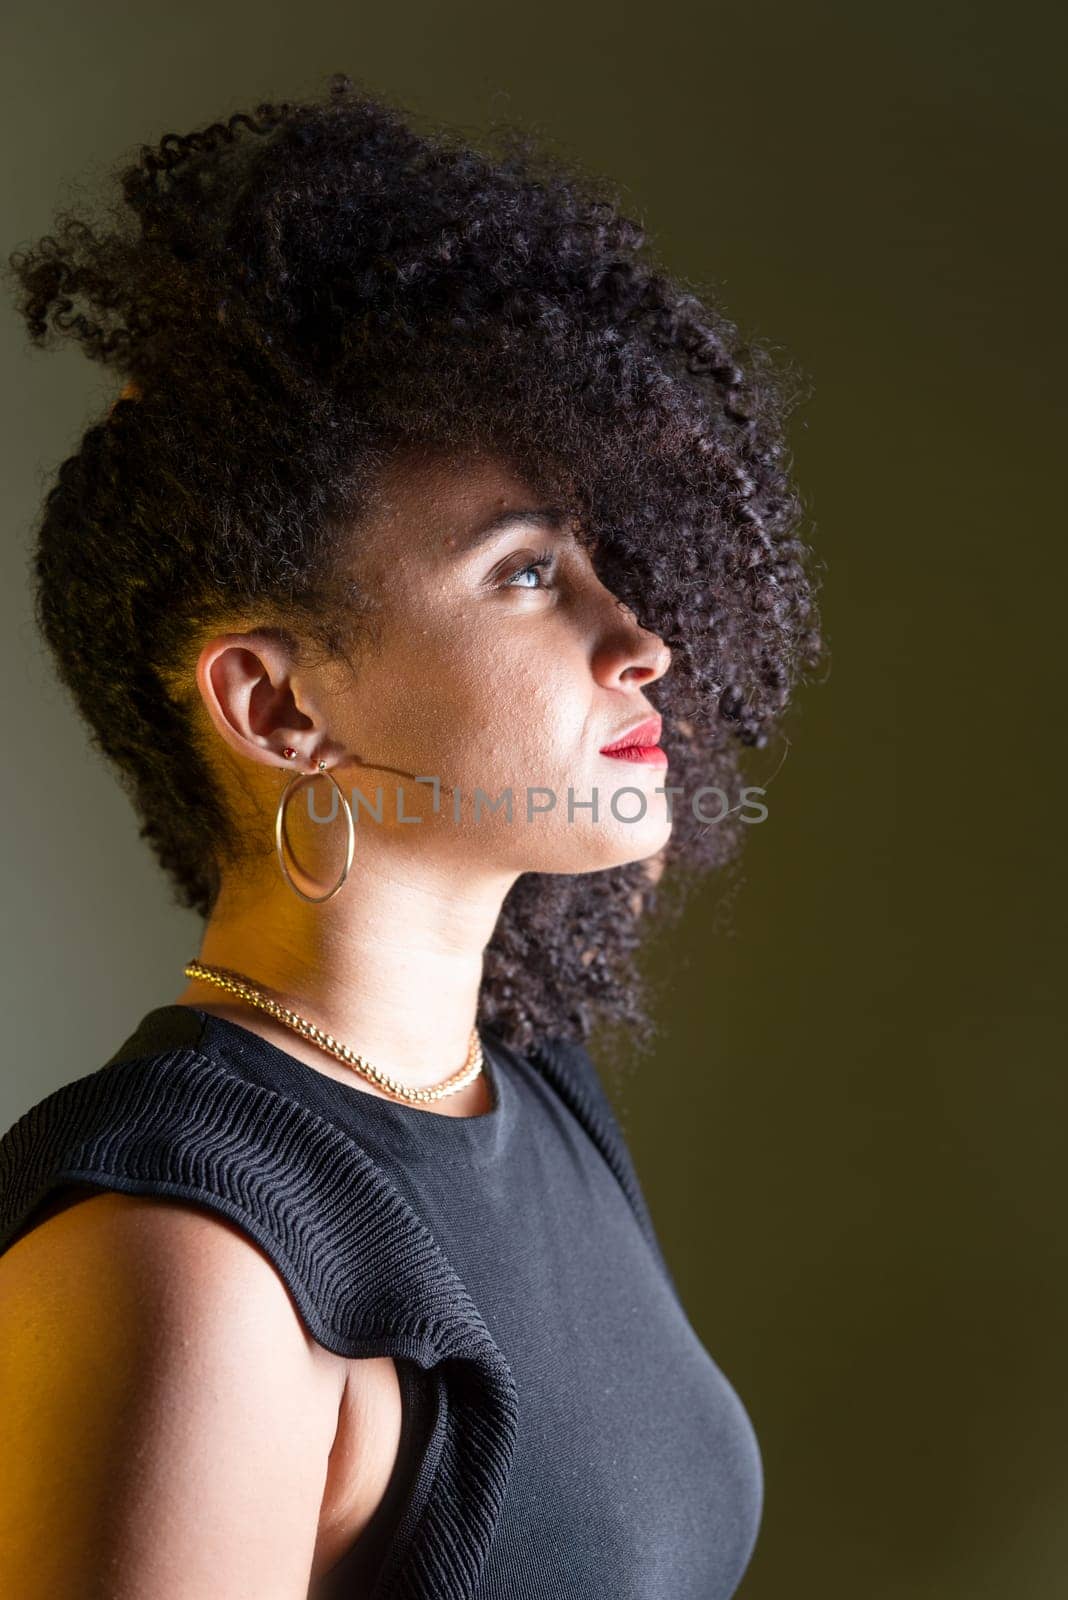 Beautiful young woman in profile wearing black clothing, with hair in her face.  by ThalesAntonio